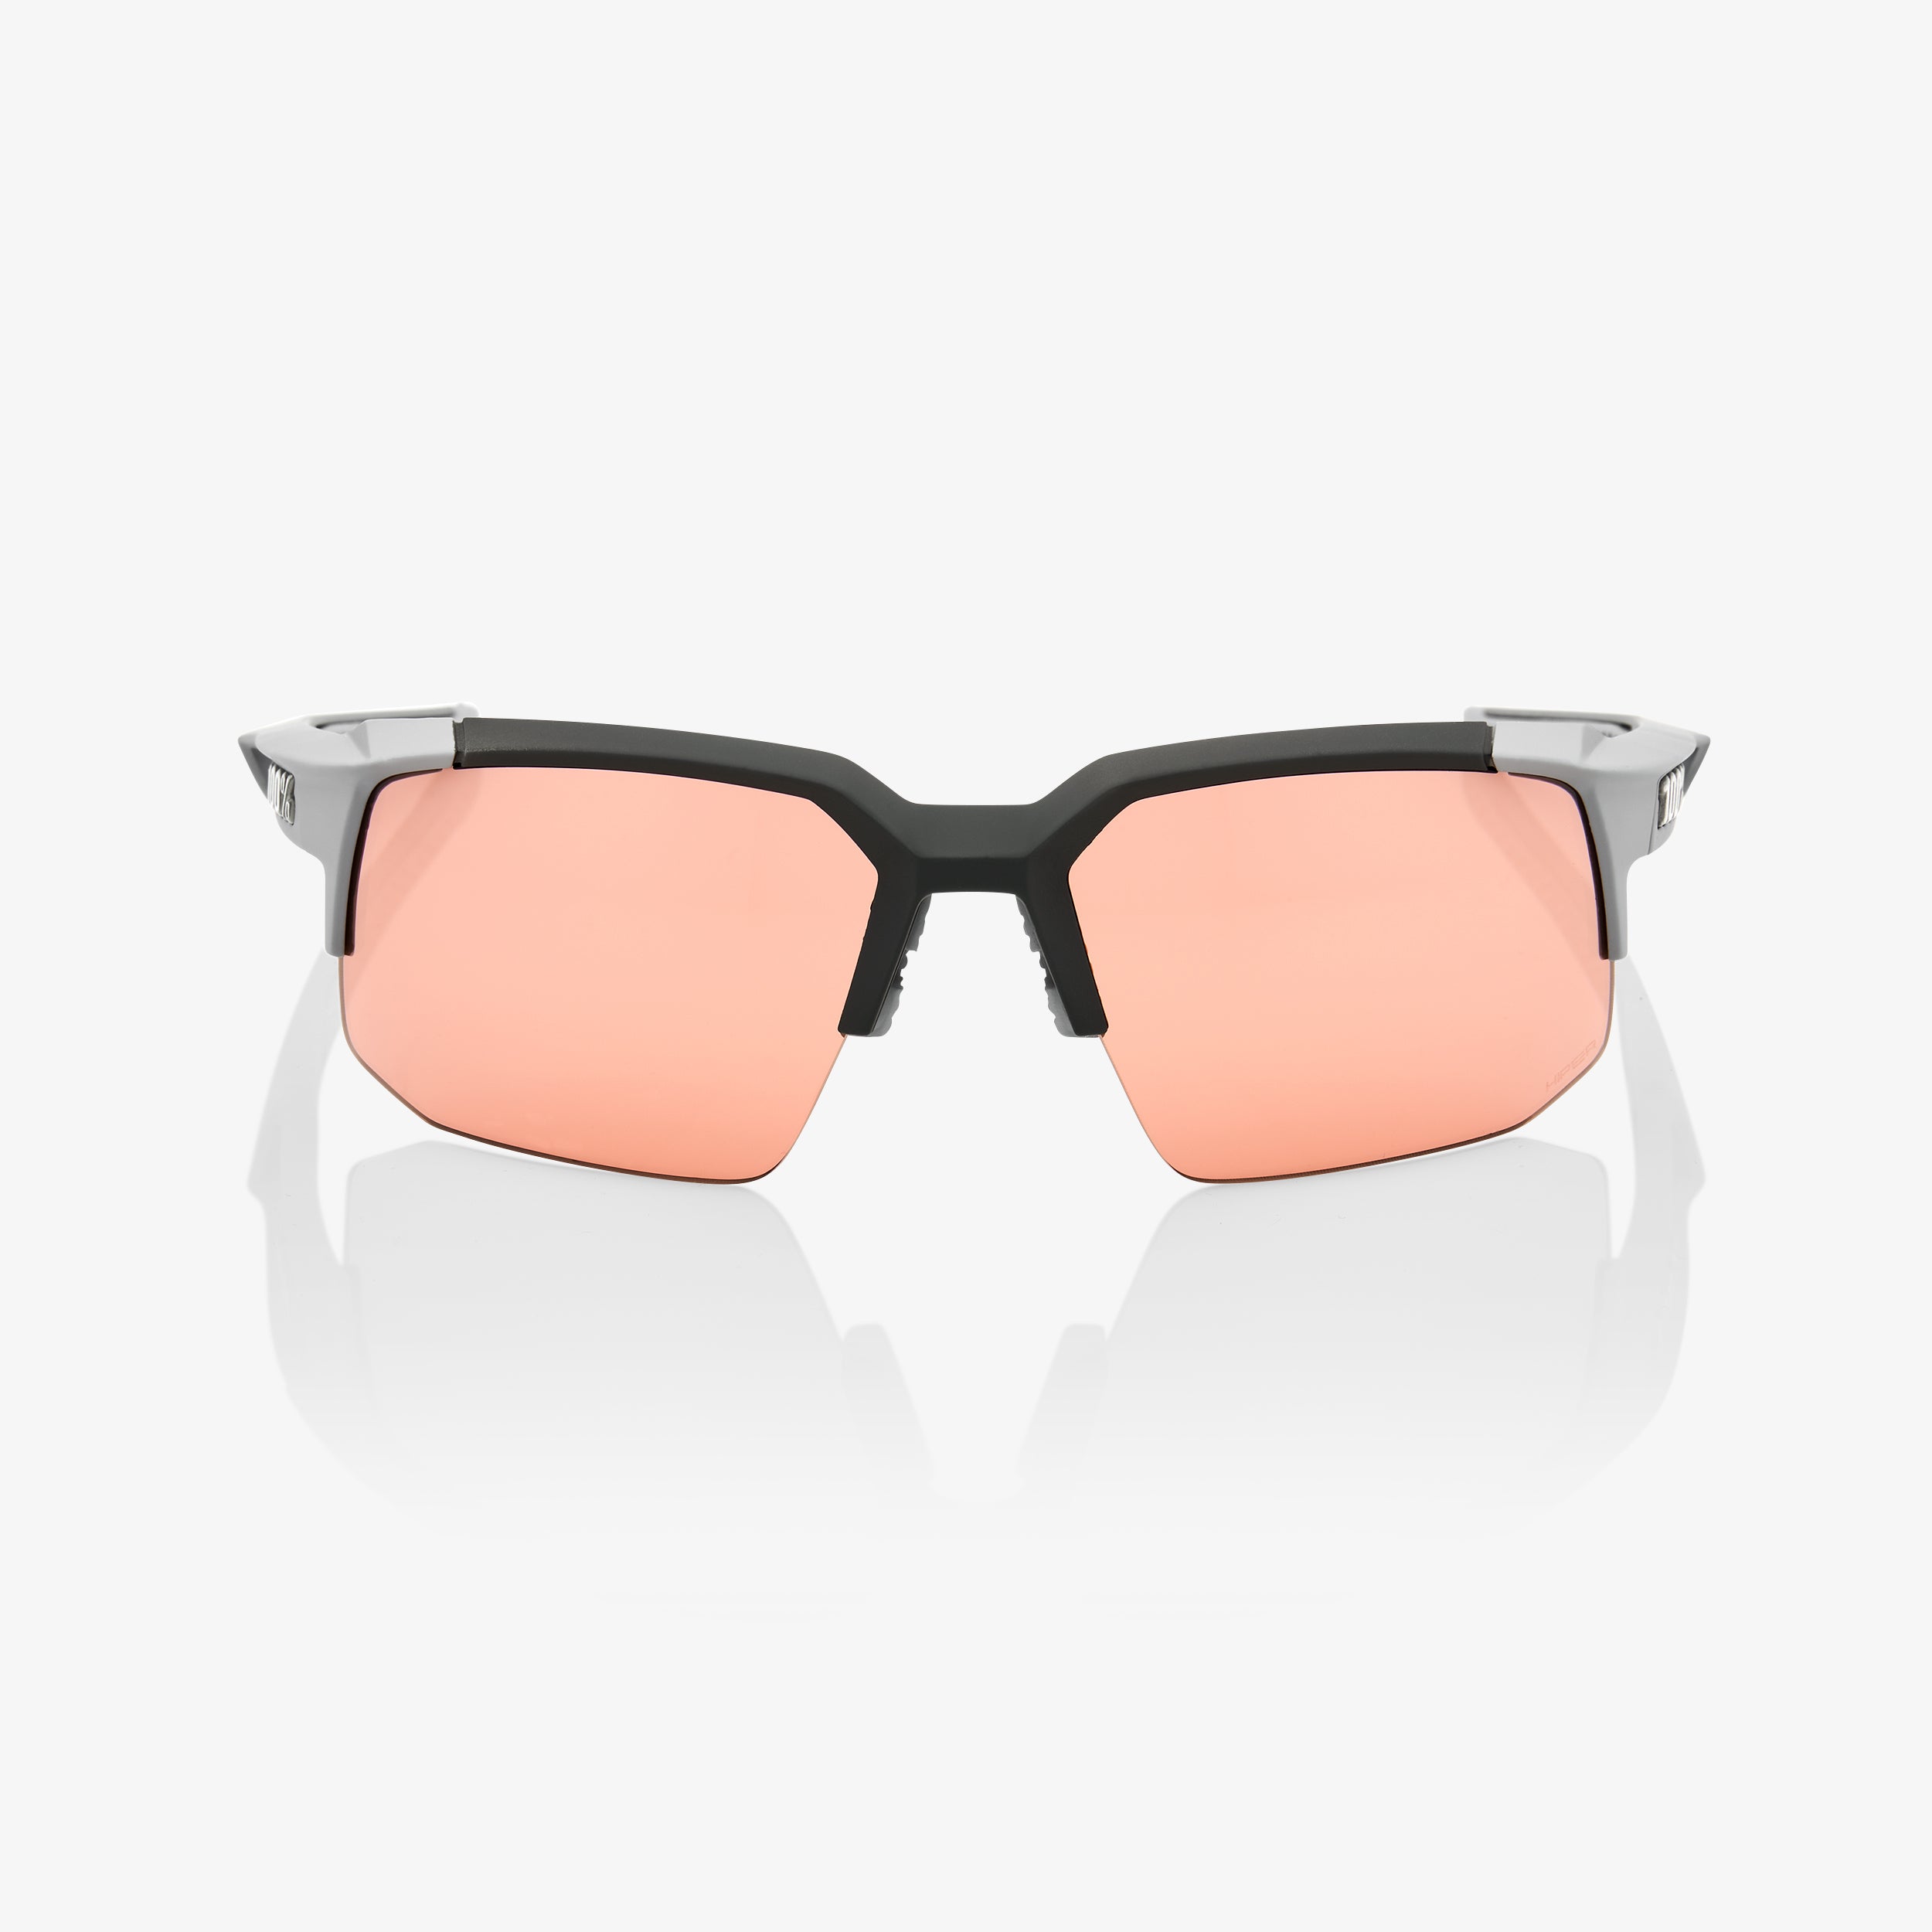 SPEEDCOUPE - Soft Tact Stone Grey - HiPER Coral Lens